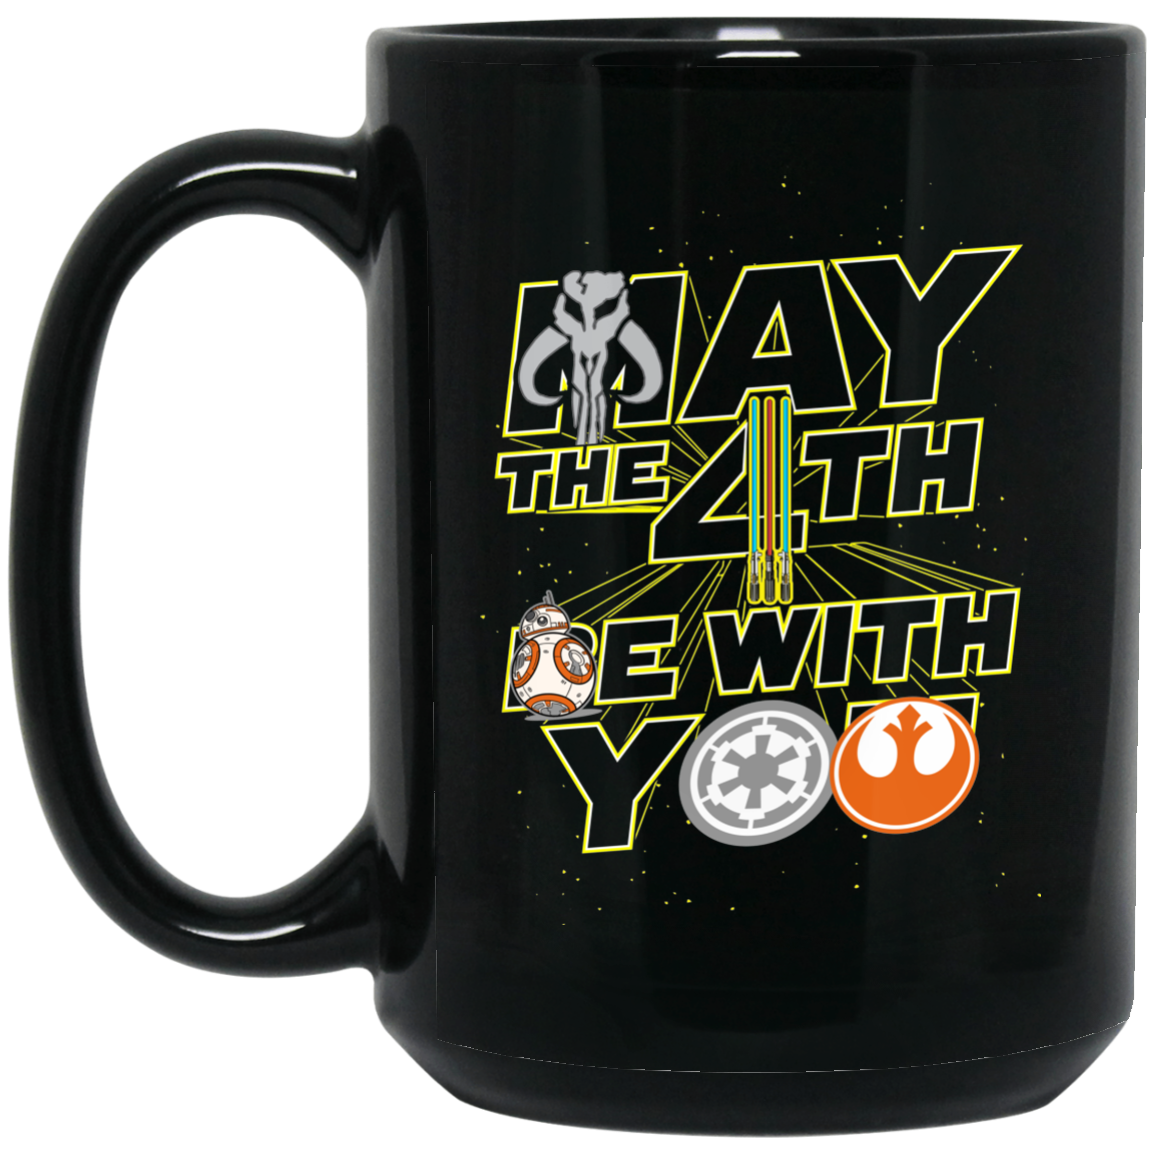 May the 4th Be With You:  Black Mug